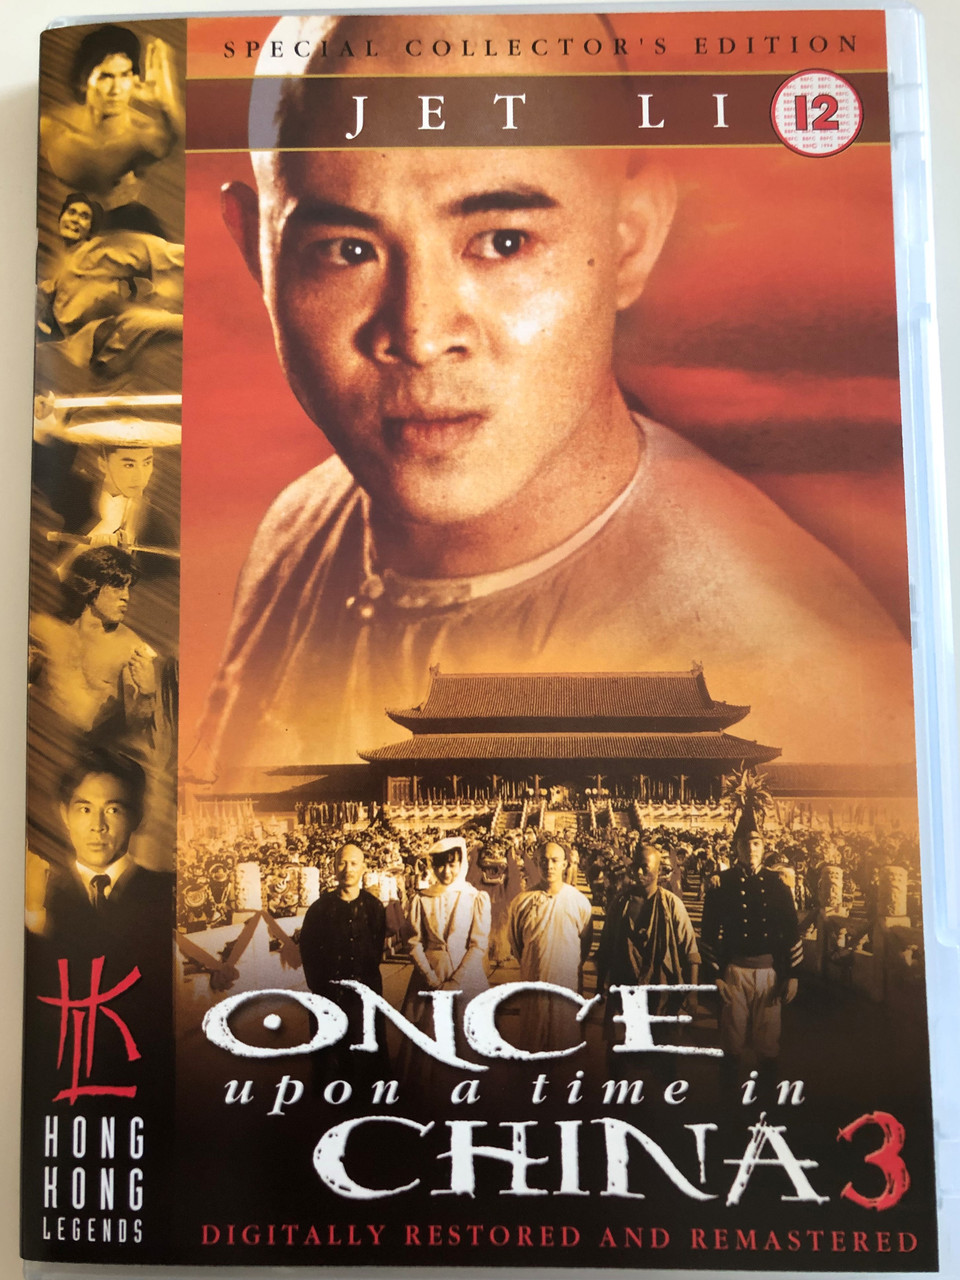 Once upon a time in china 3 DVD / Special Collector's Edition / Directed by  Tsui Hark / Starring: Jet Li, Rosamund Kwan, Max Mok, Lau Shun -  bibleinmylanguage